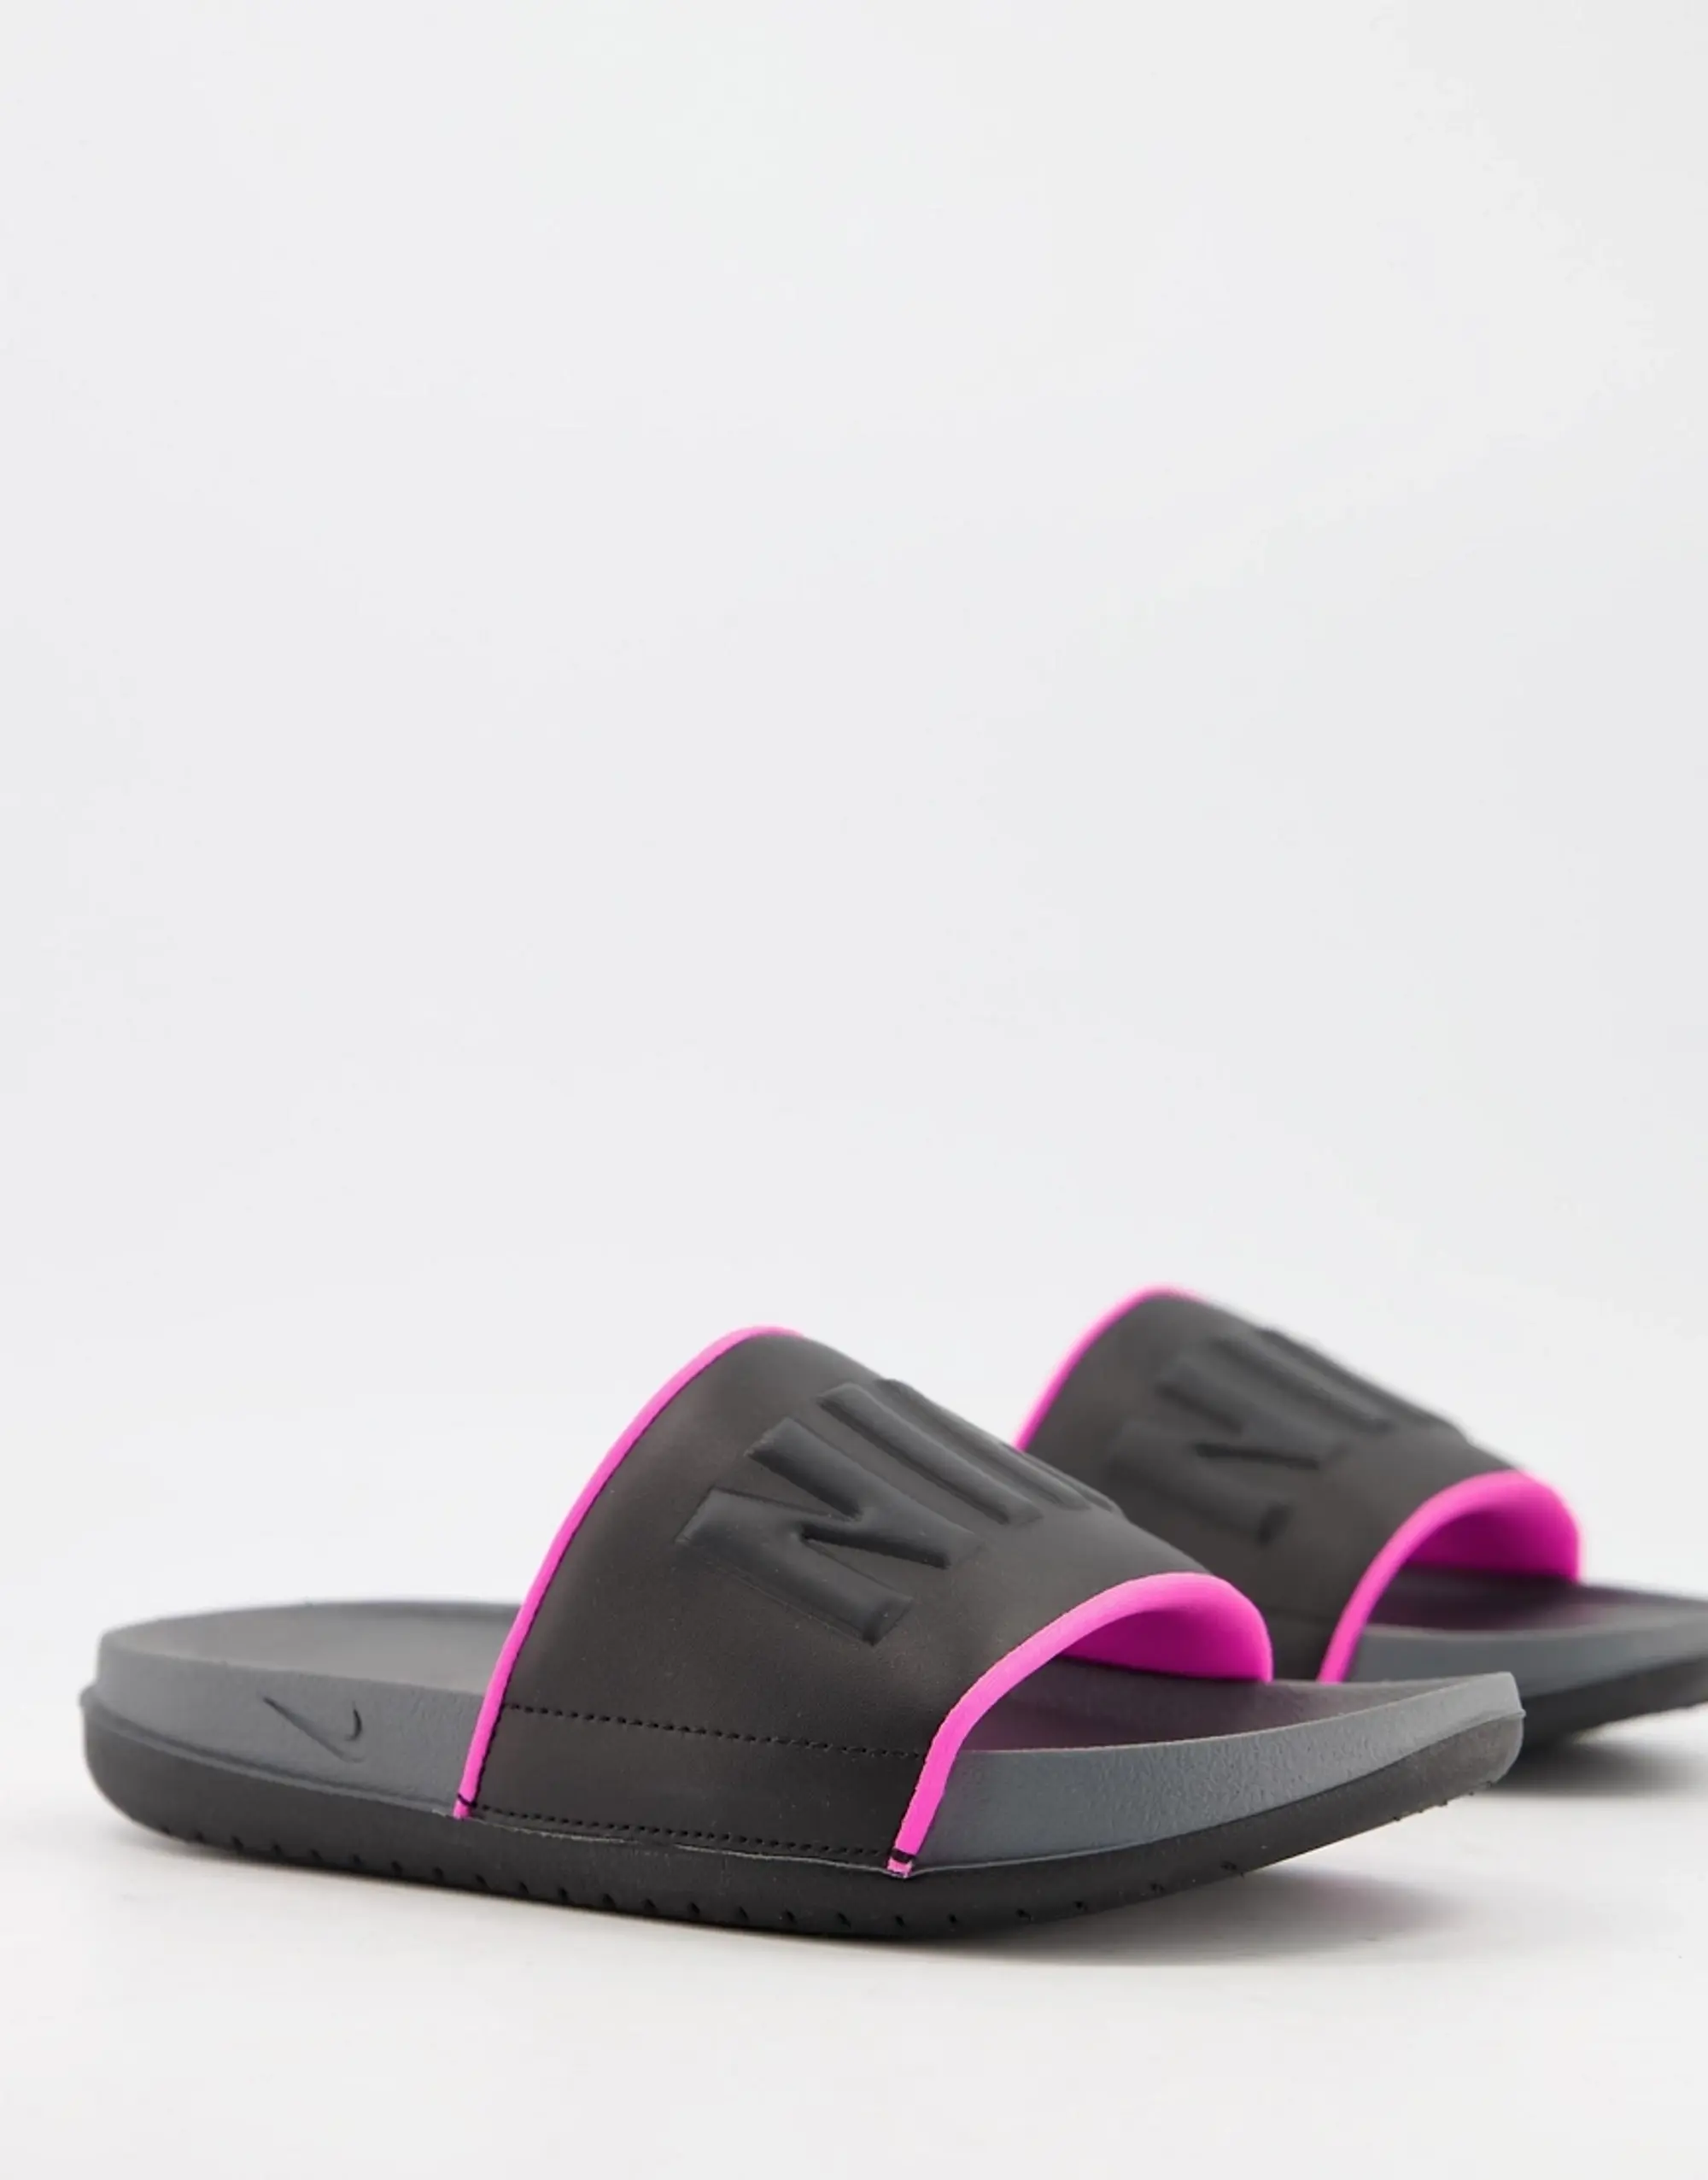 Nike Offcourt Sliders In Black And Pink